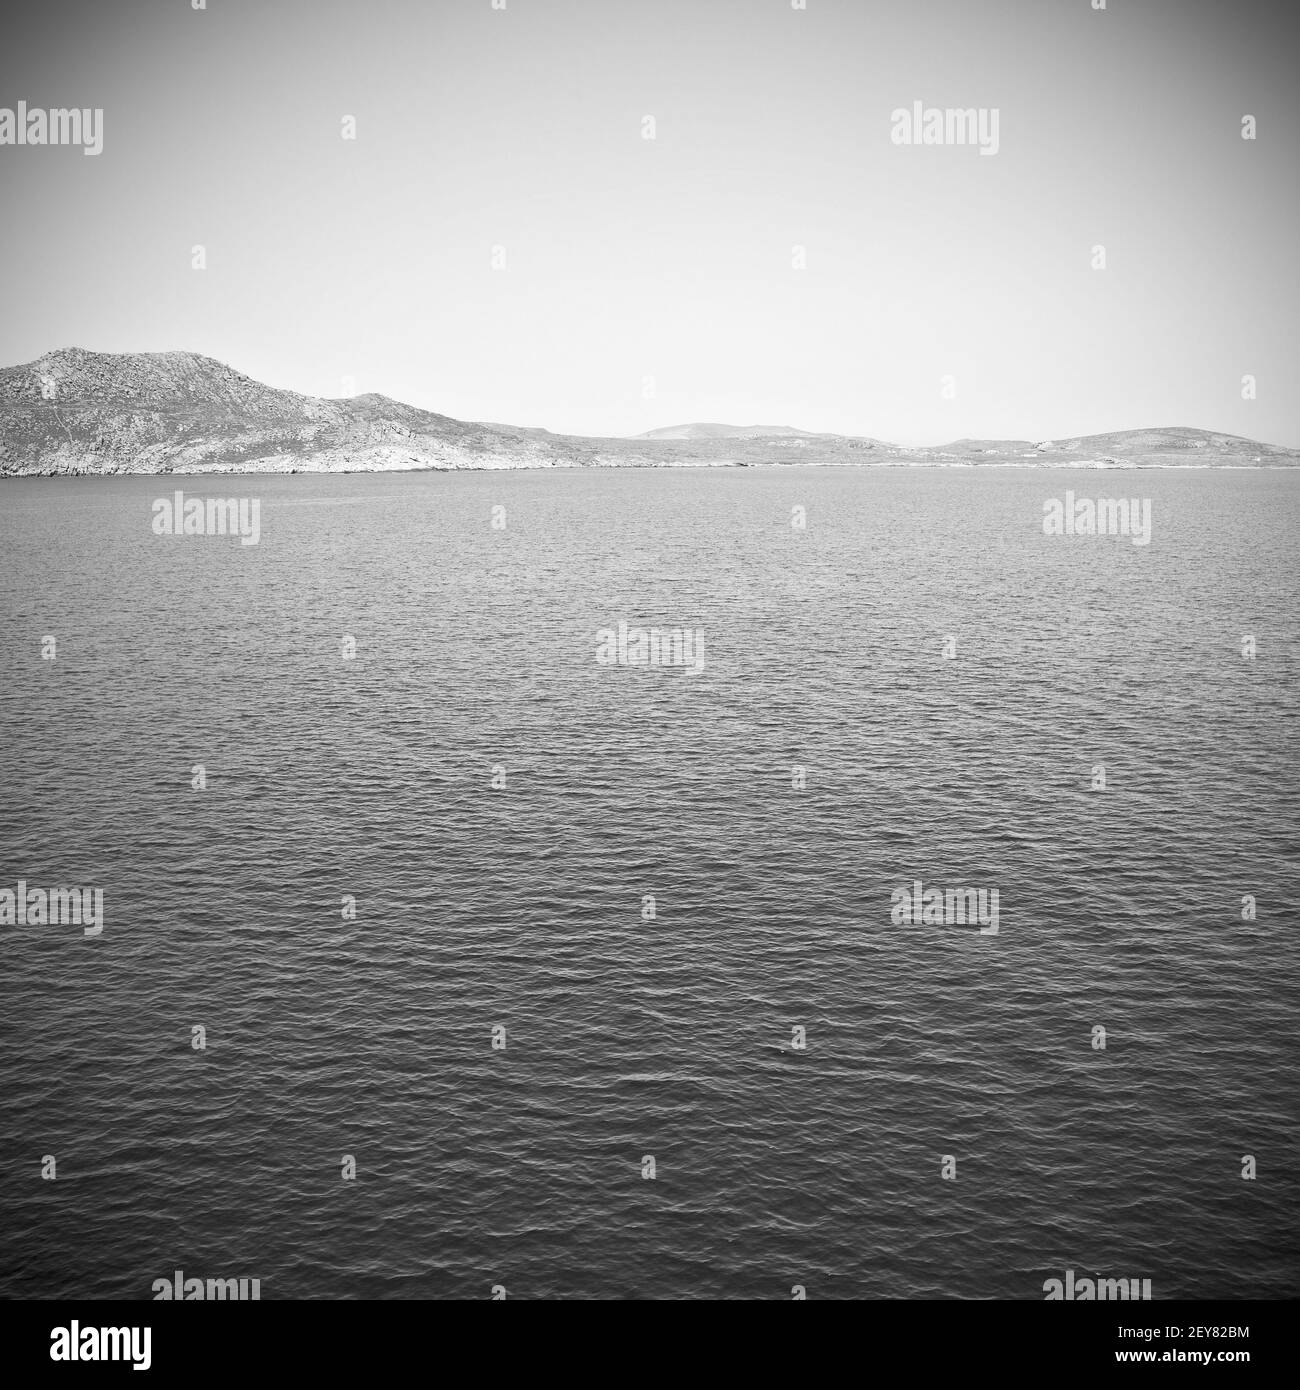 Greece from the boat  islands in mediterranean sea and sky Stock Photo